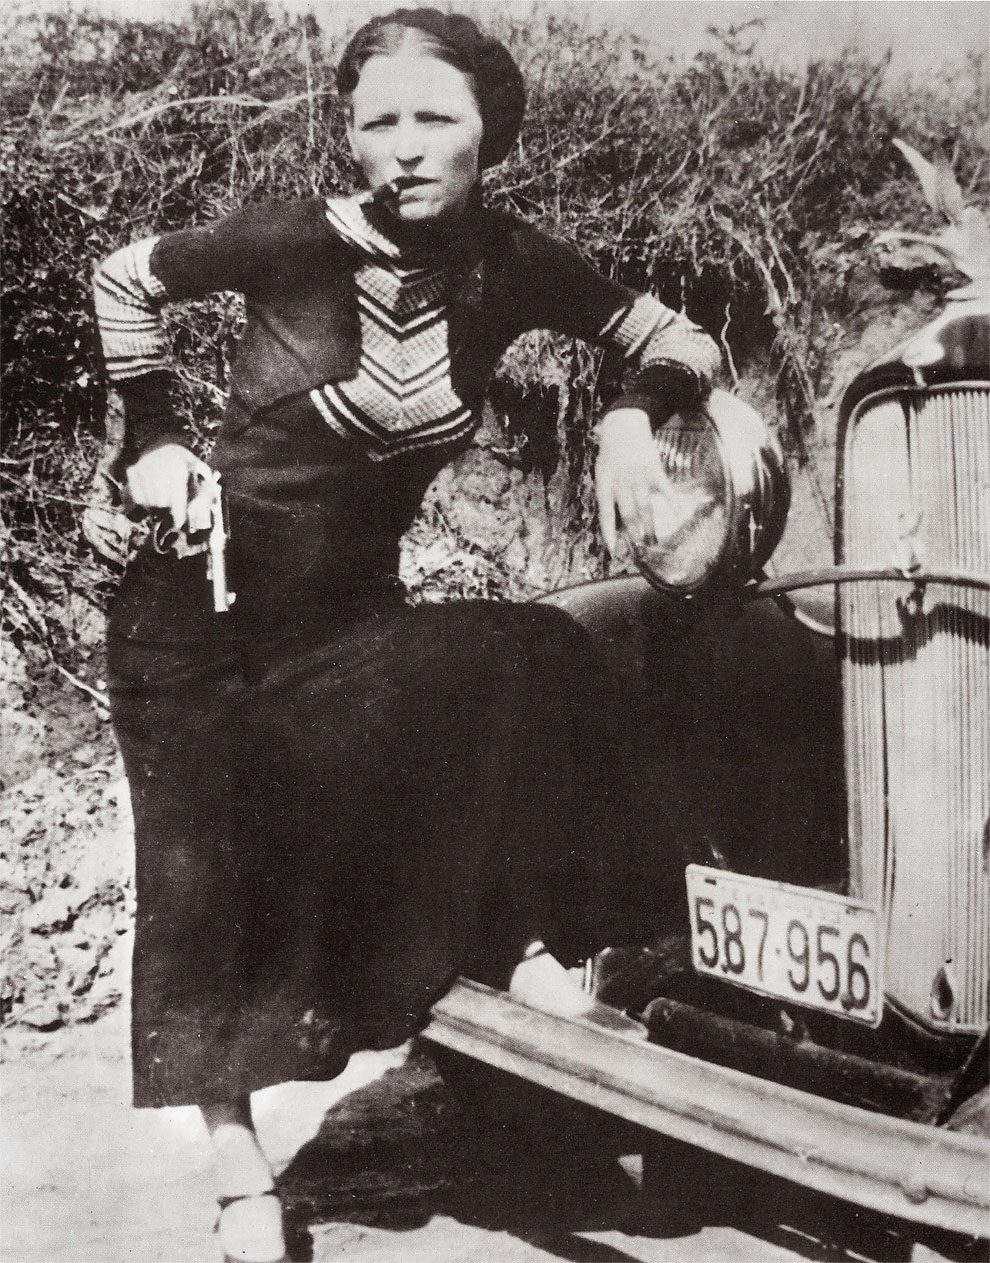 Full-length portrait of American criminal Bonnie Parker (1910 – 1934) smoking a cigar while leaning on the front fender of a car and holding a pistol on April 17, 1933